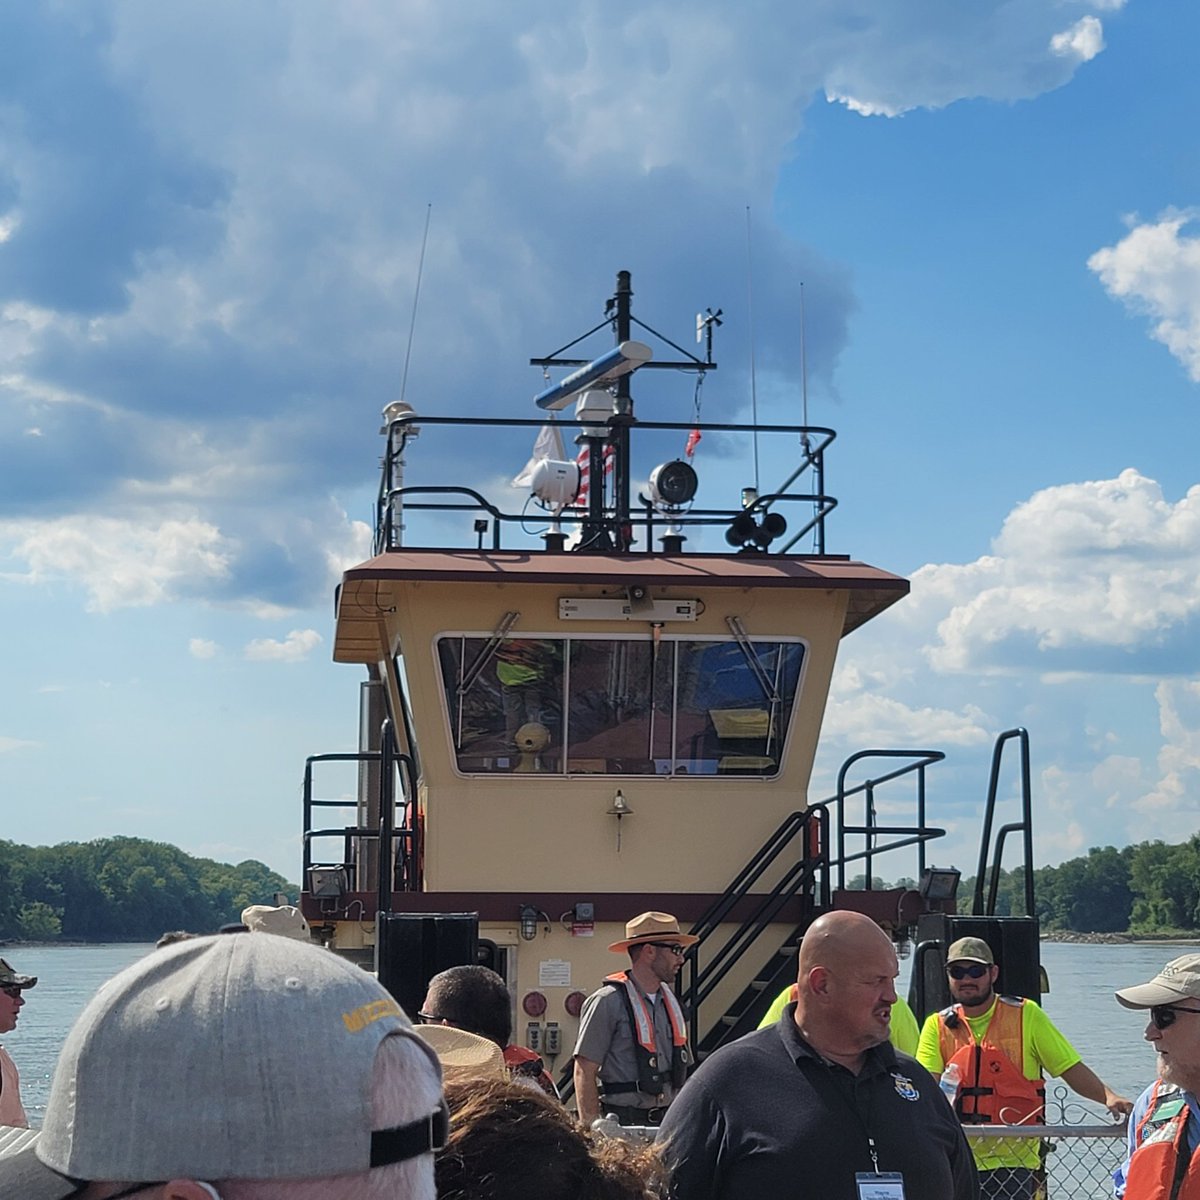 Any day is a great day to be on the #MissouriRiver! Thanks @KC_USACE for the informational tour and for your leadership in restoring the navigation channel so that agricultural and other  products can move more efficiently. 
@NWDUSACE @USACEHQ @MOFarmBureau @ProtectMORiver